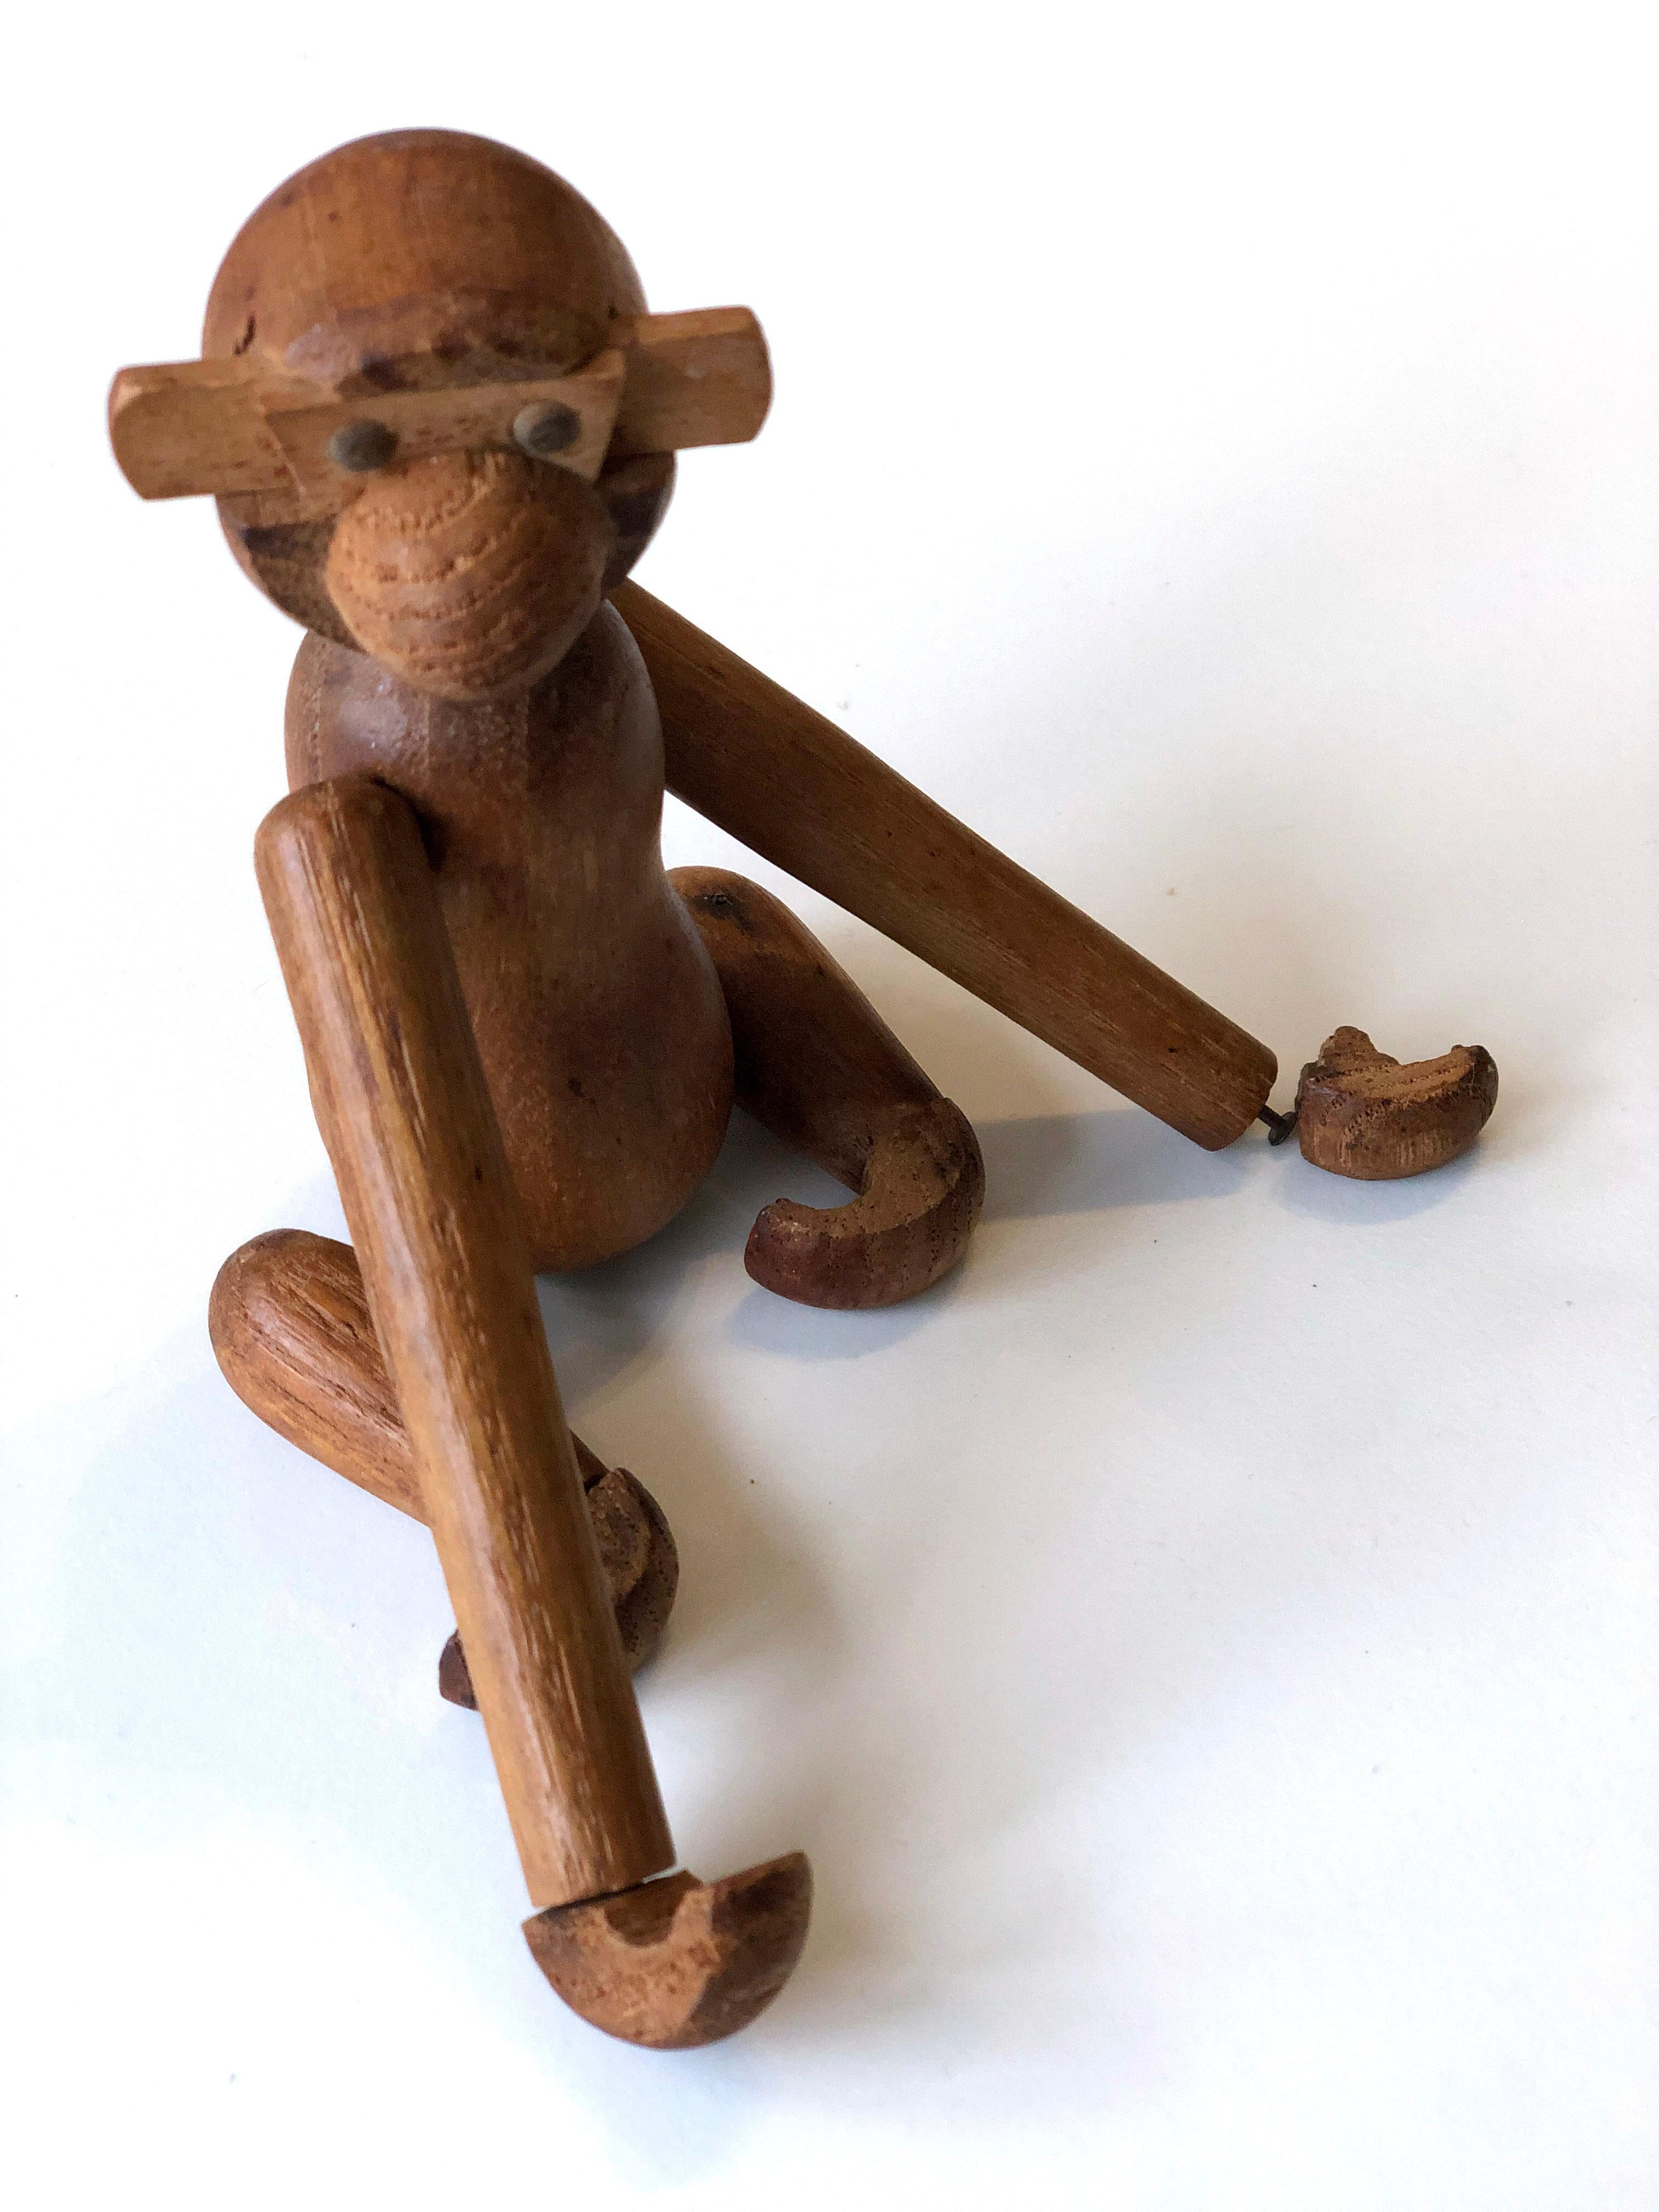 Vintage 1950's small wooden monkey - Kay Bojesen style For Sale 6